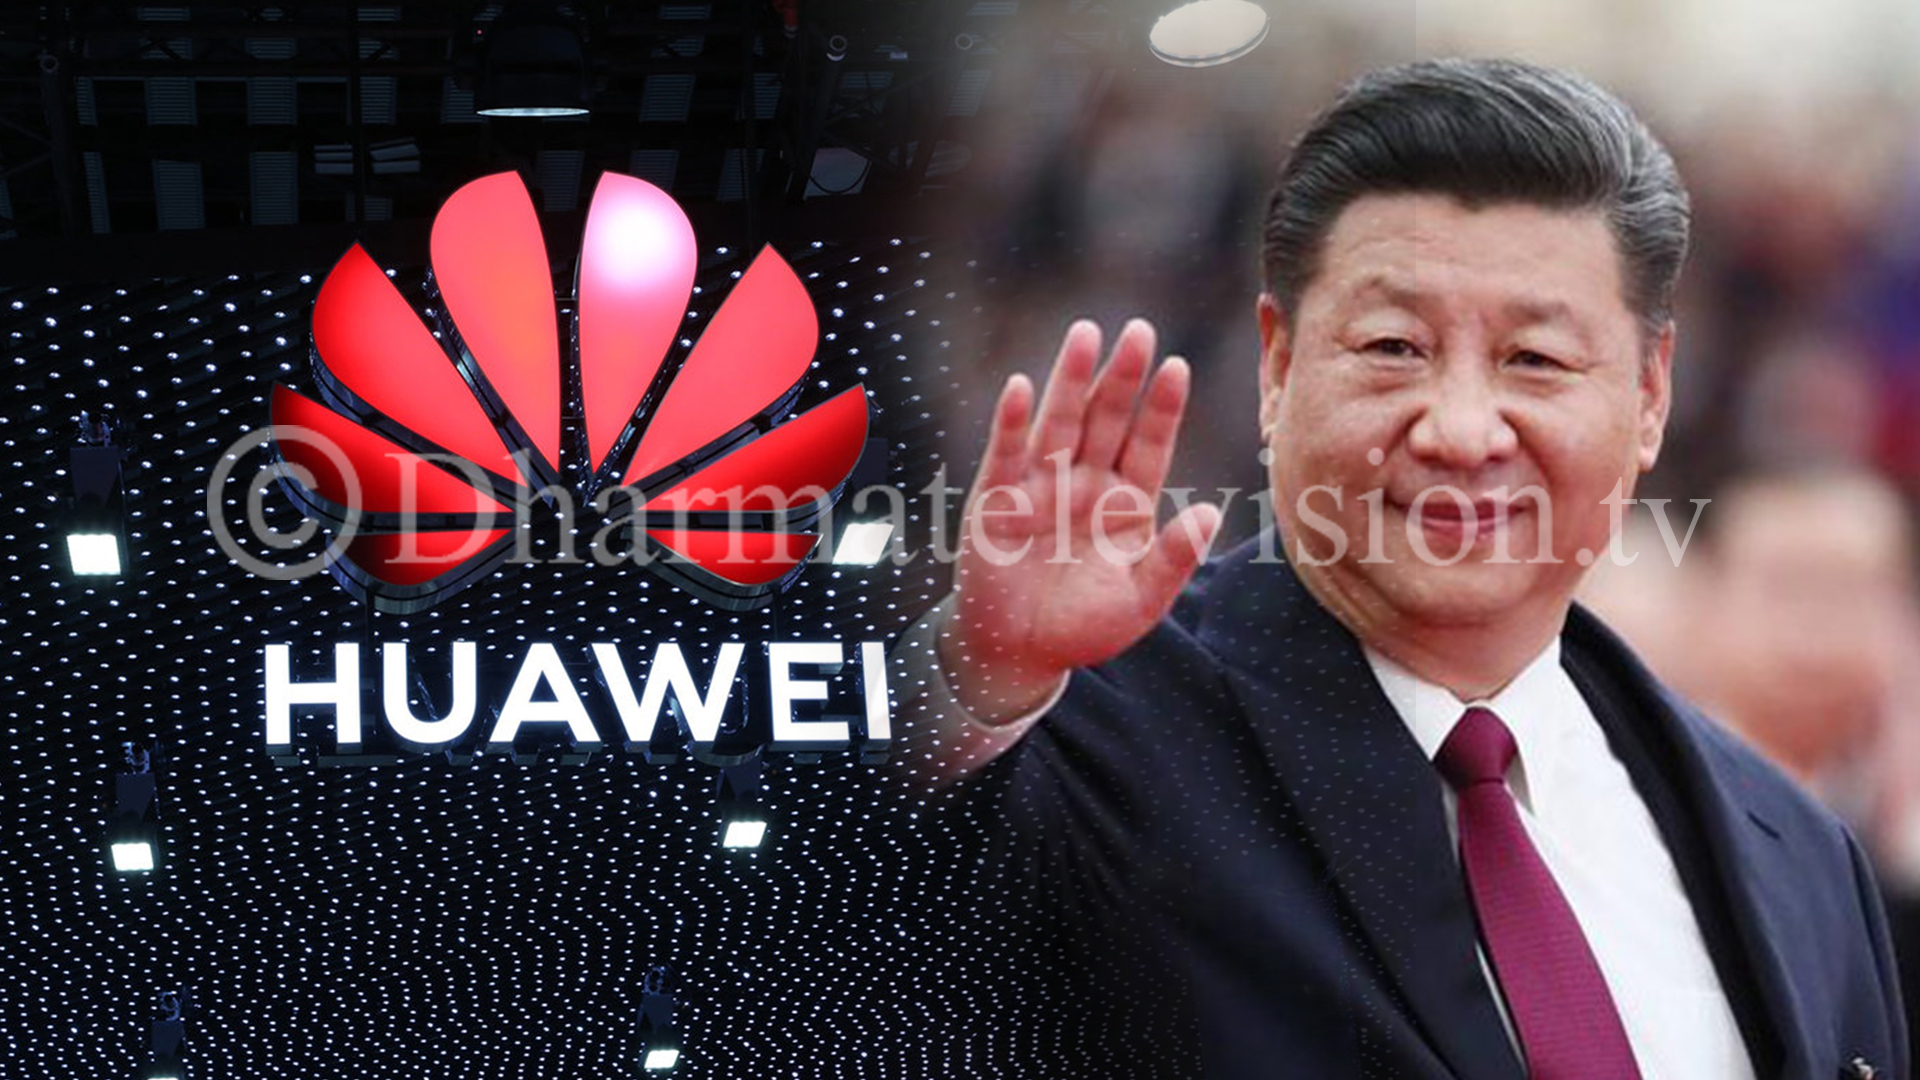 Indian Govt Claims Huawei, Alibaba, Tencent and more Chinese firms Have Links to Chinese Army